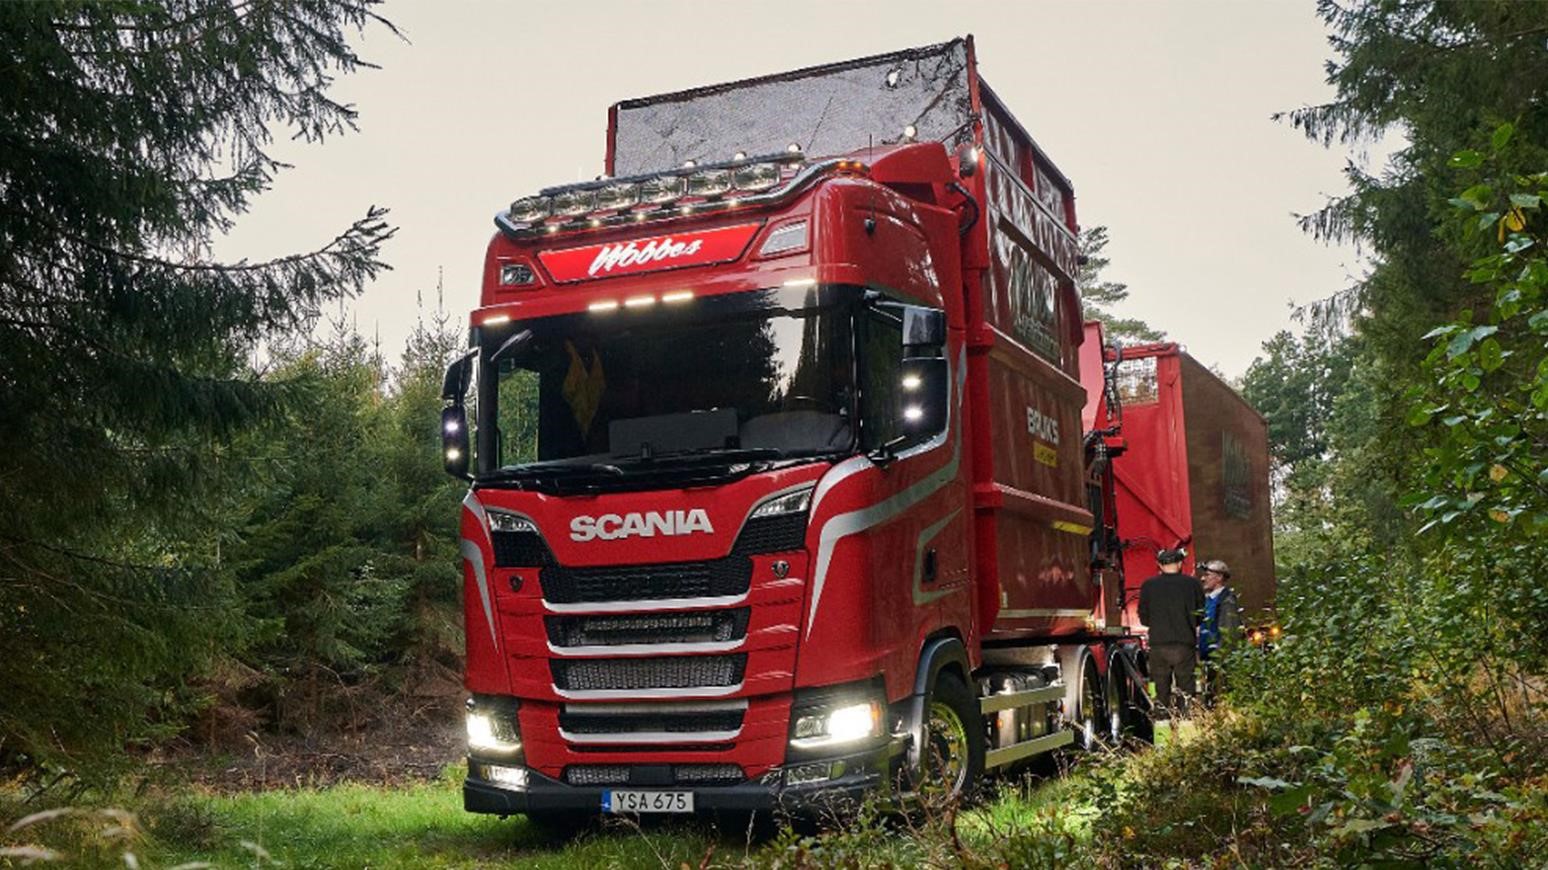 Swedish Wood-Chipping Specialist Relies On Scania 650 S & R 580 Trucks To Keep Up With High Demand